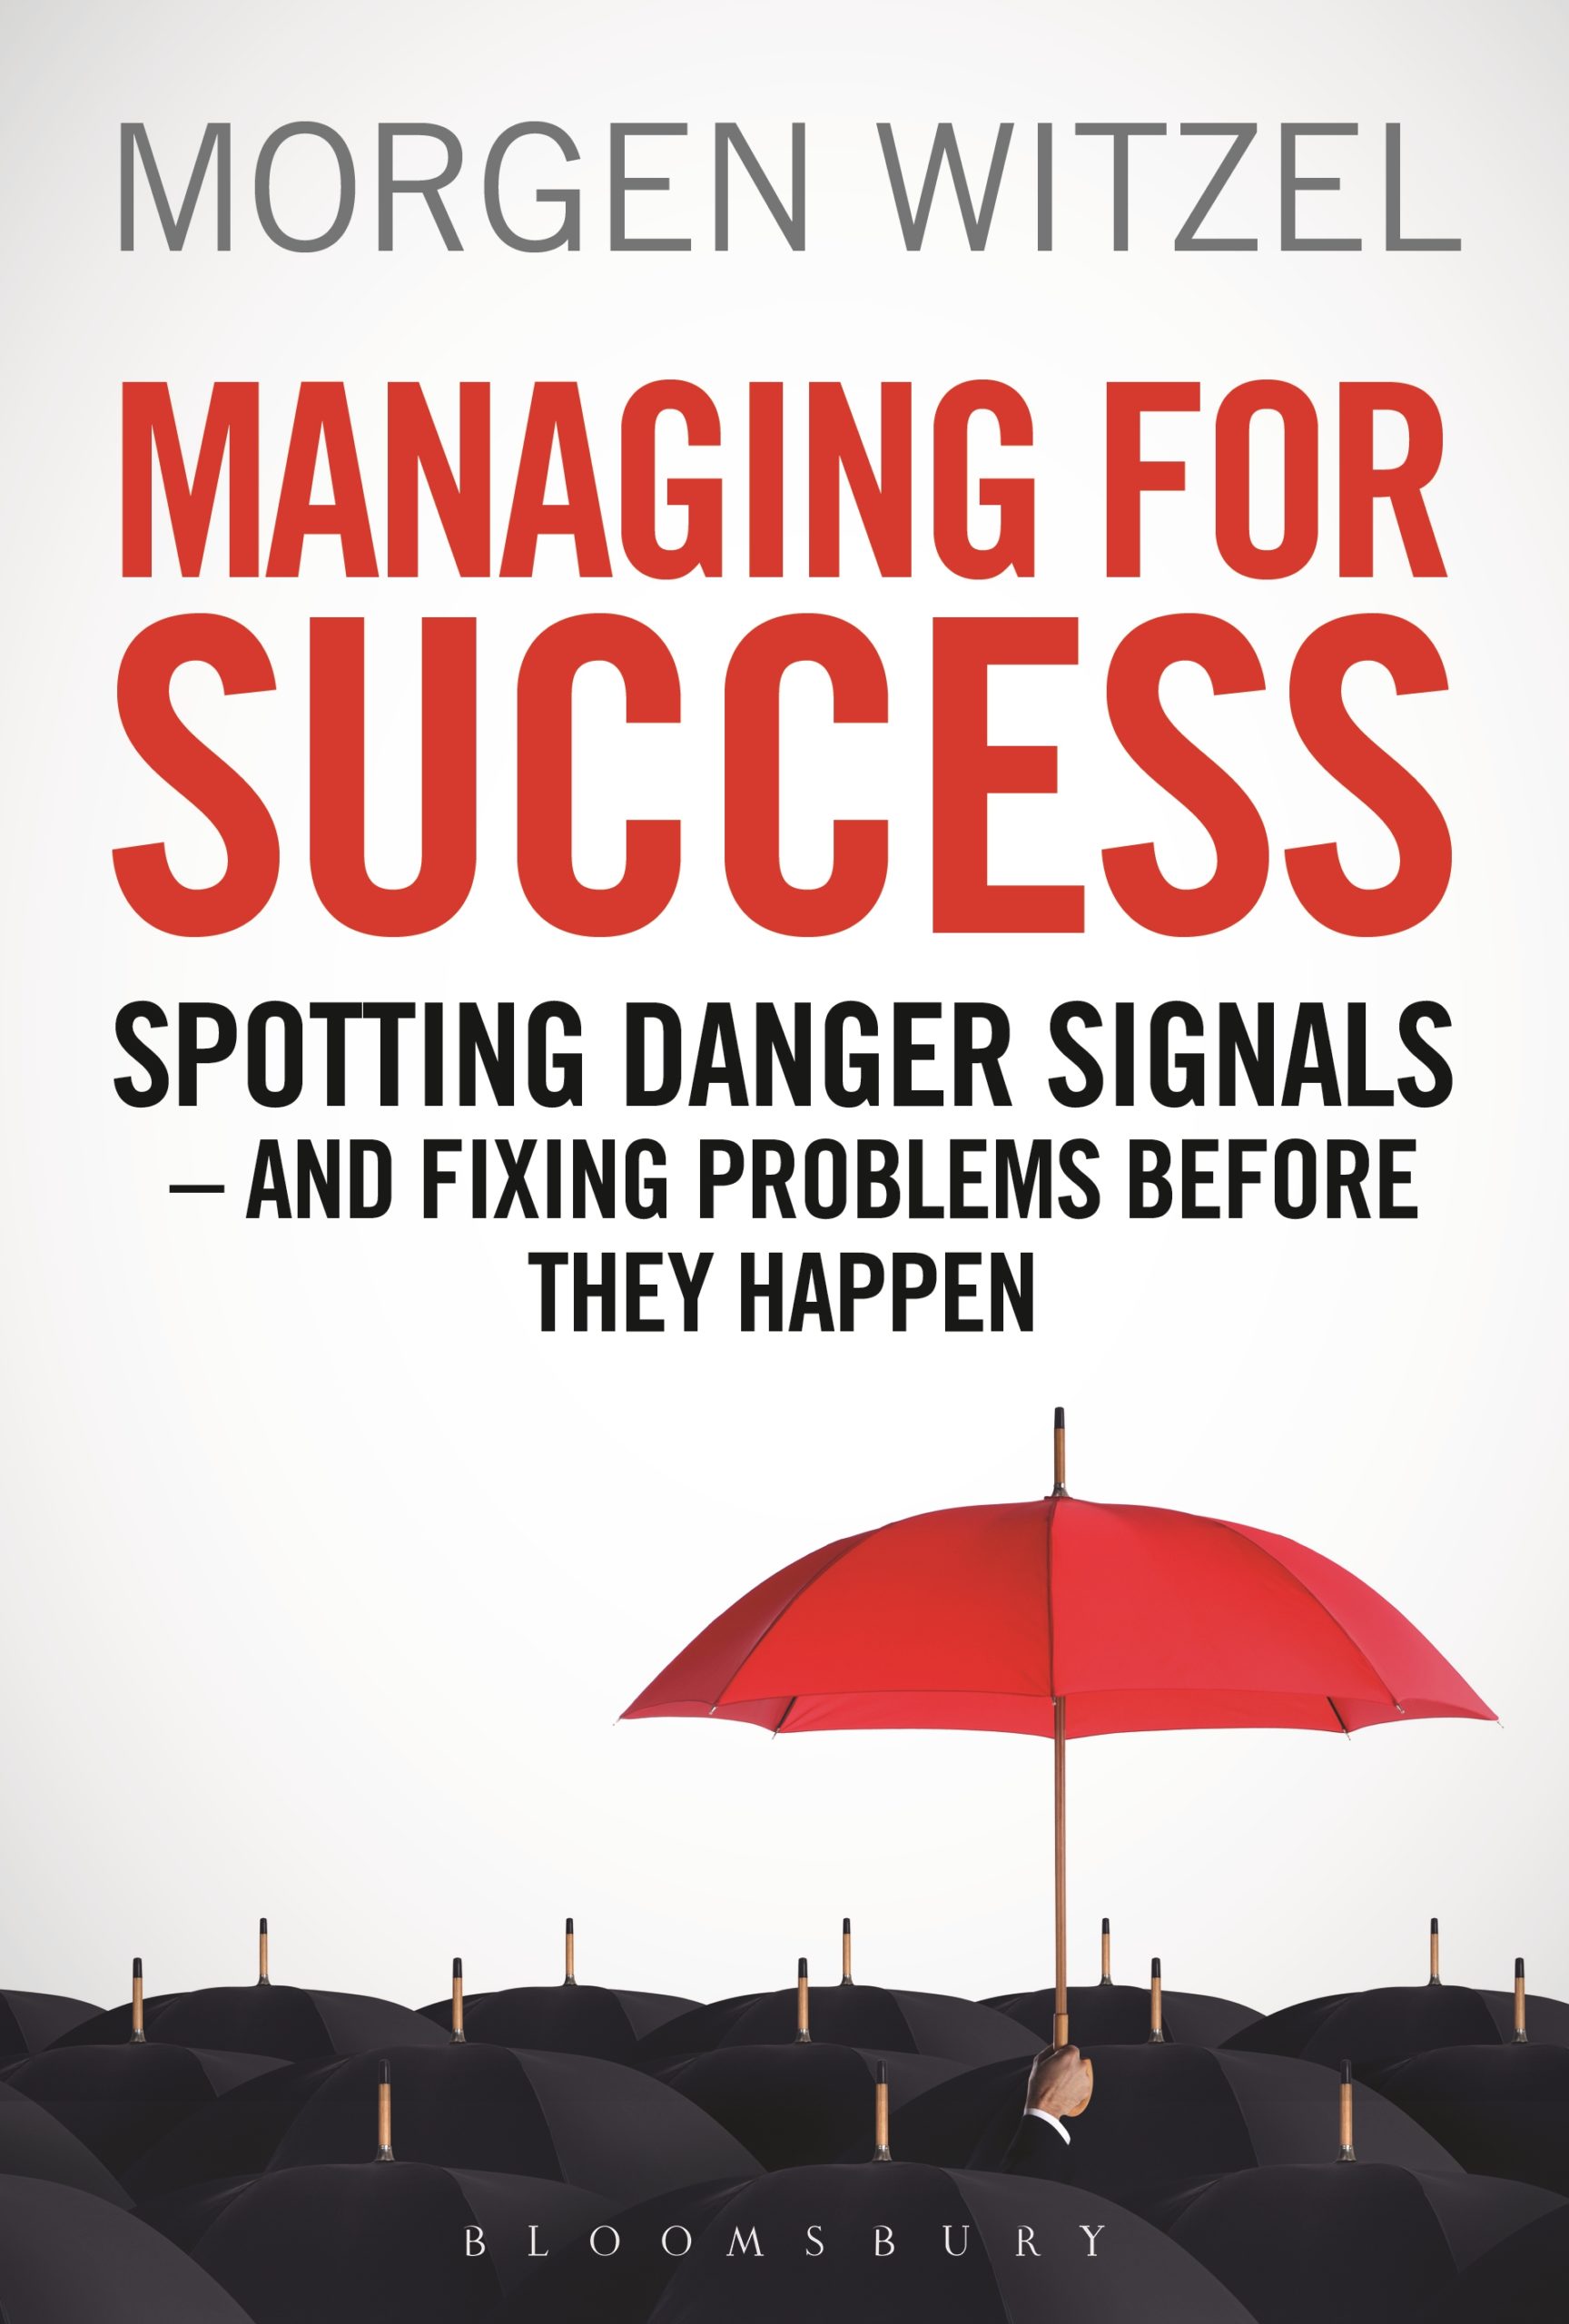 Managing for Success: Spotting Danger Signals and Fixing Problems Before They Happen